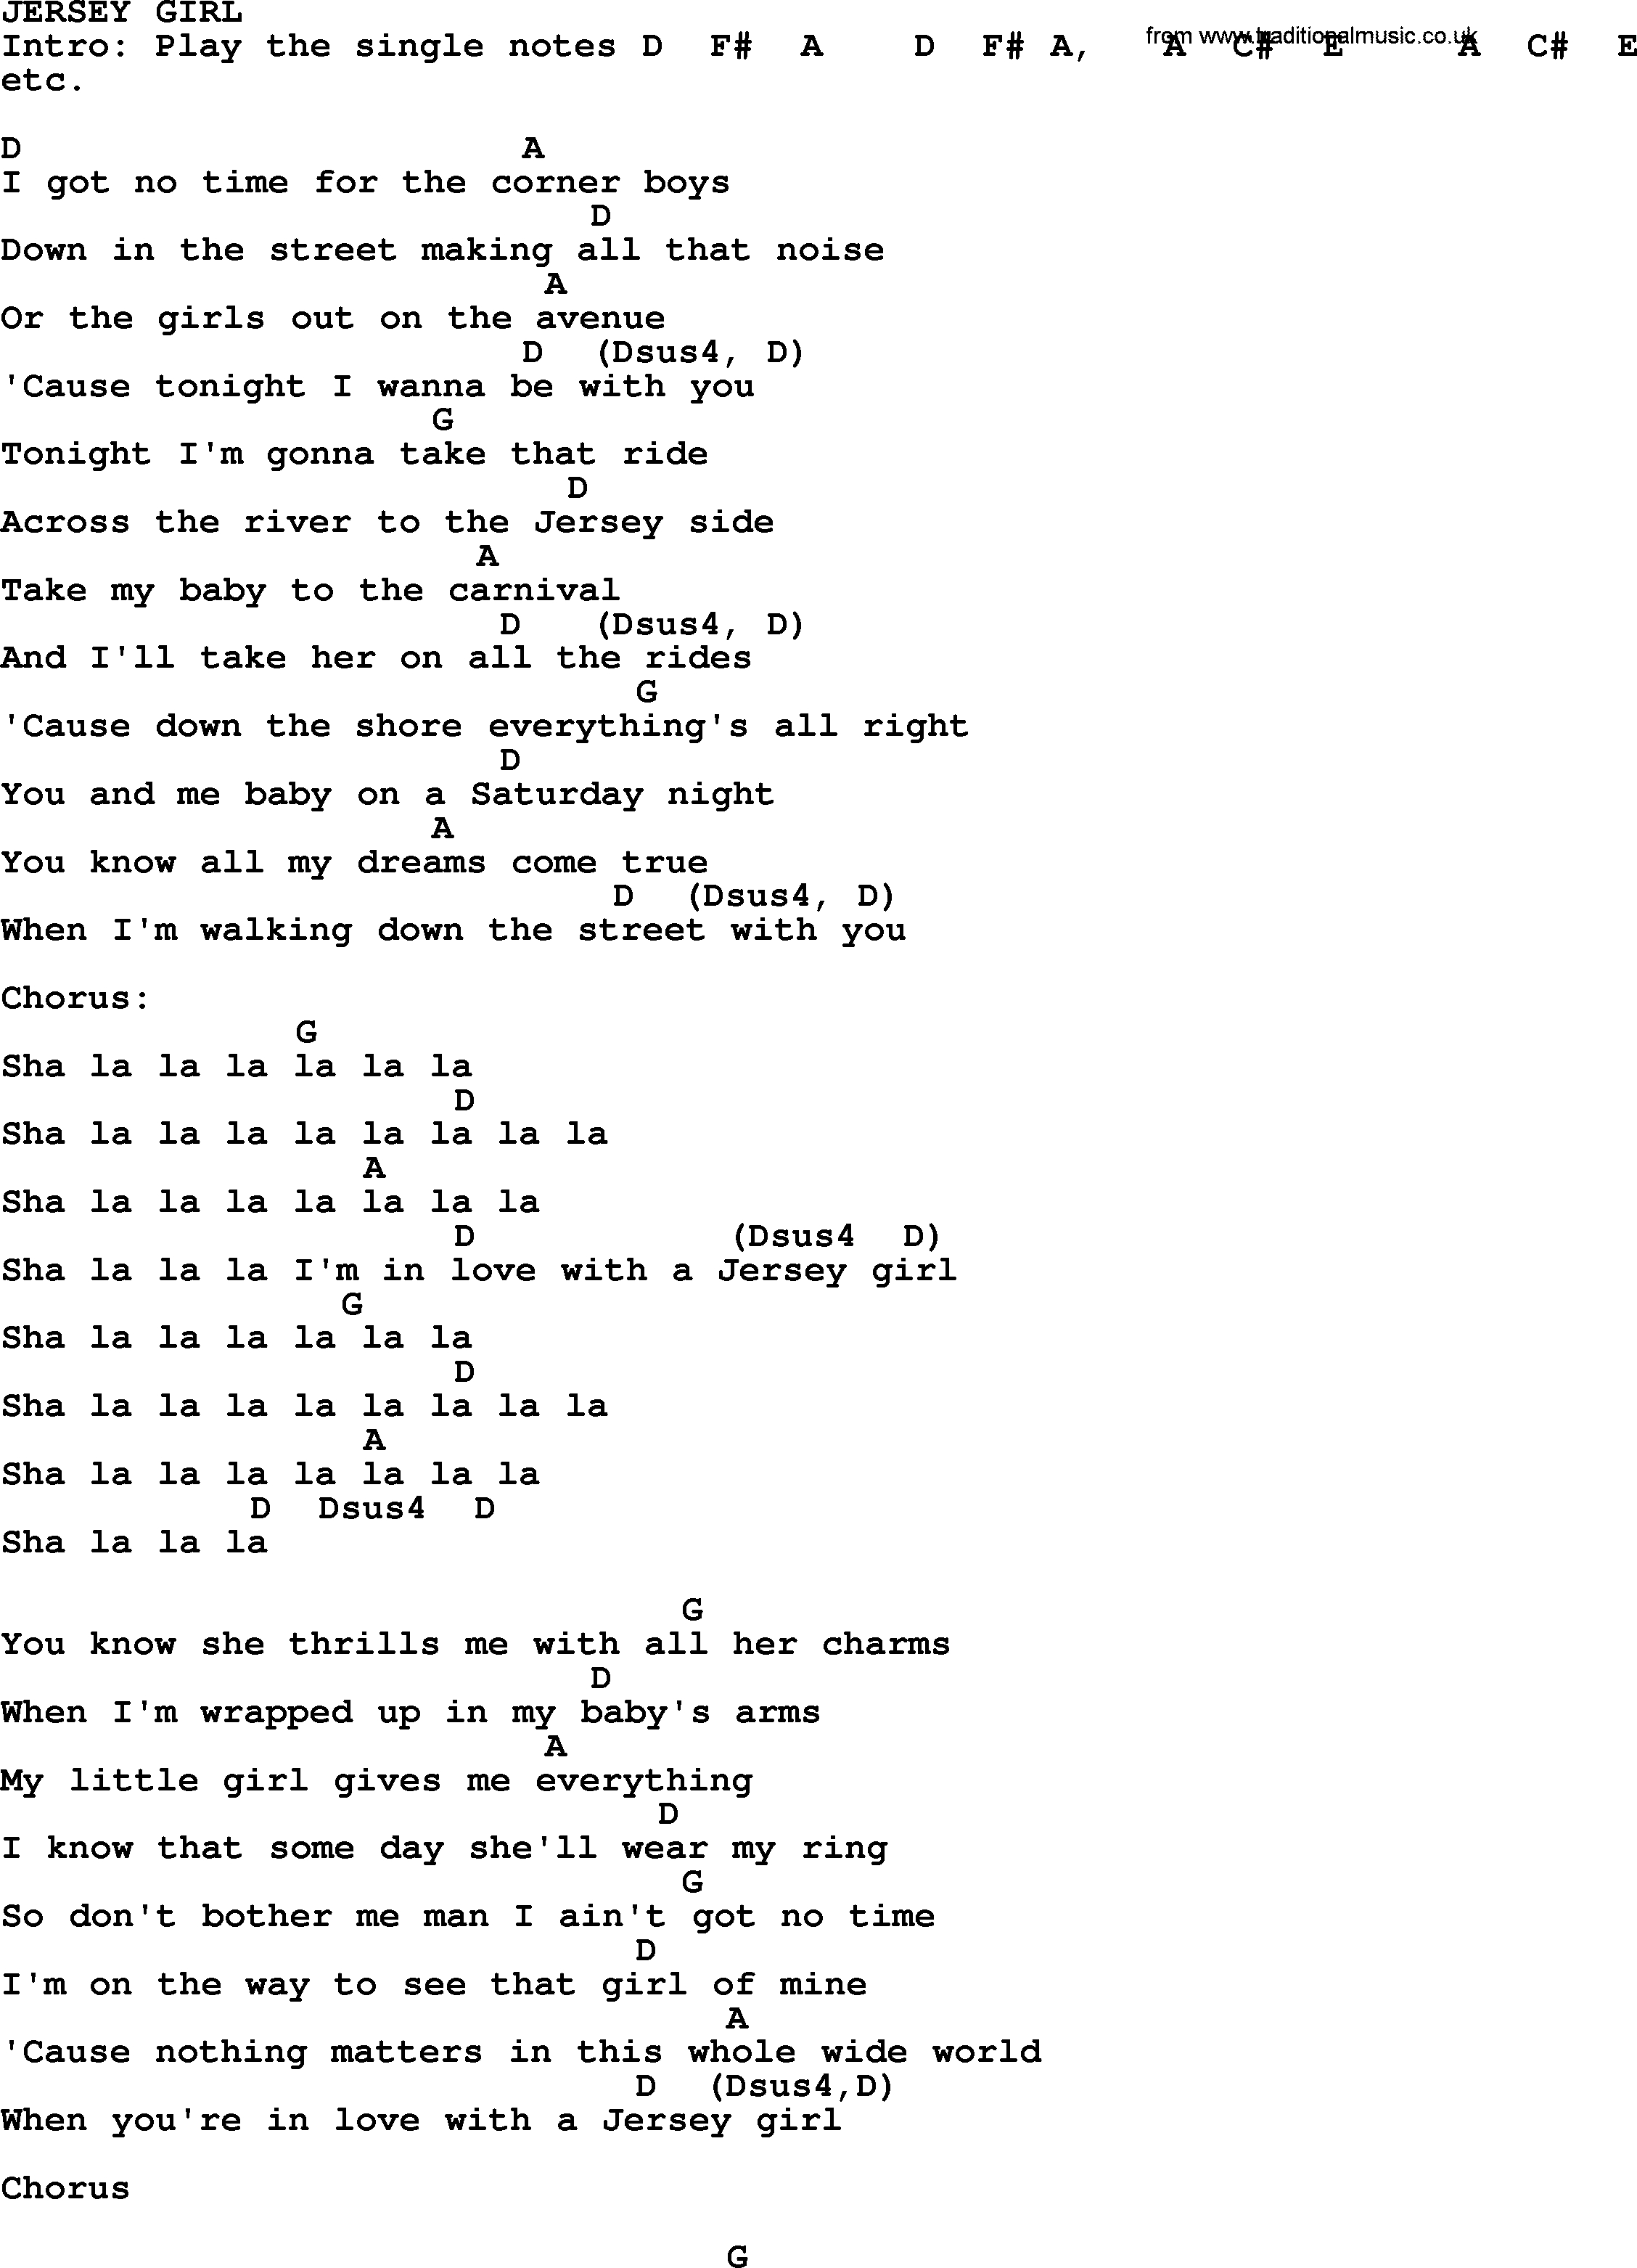 My Girl Chords Bruce Springsteen Song Jersey Girl Lyrics And Chords